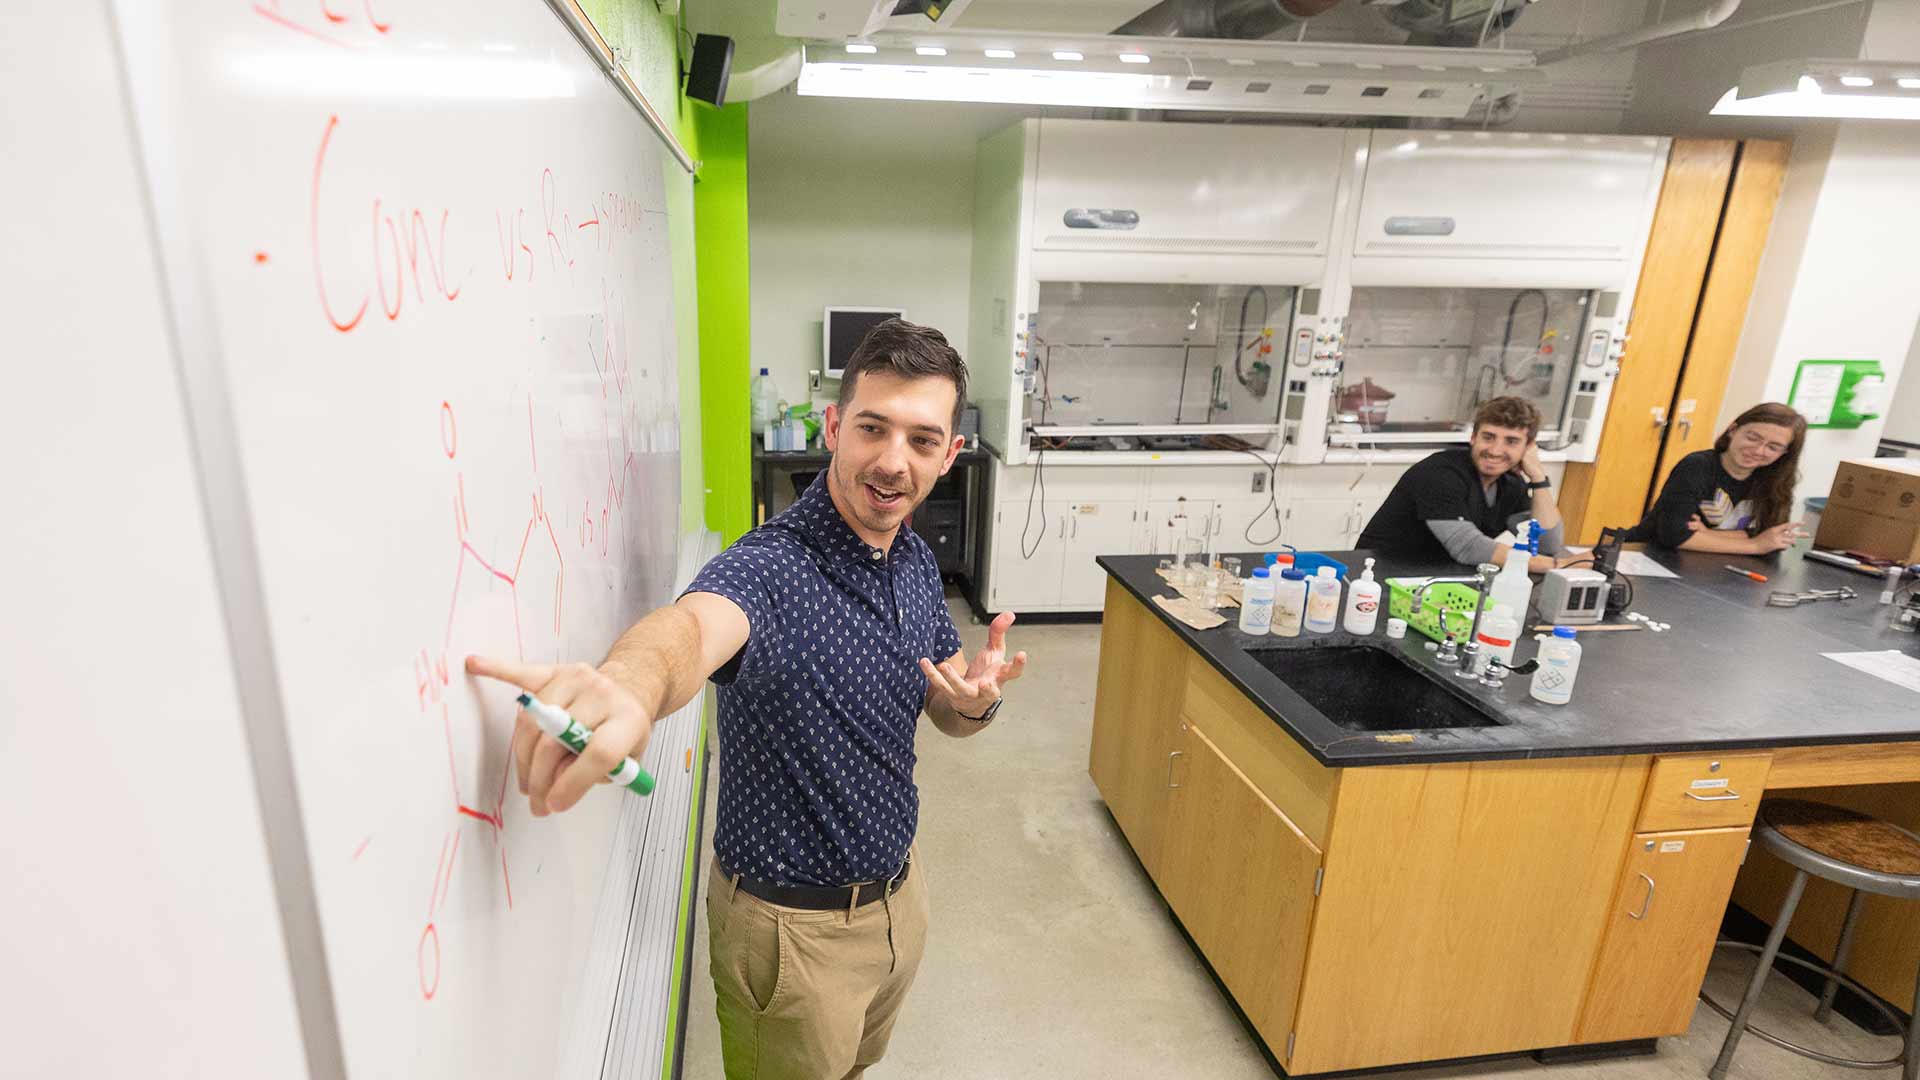 A chemistry teacher points to a dry erase board as he teaches class.